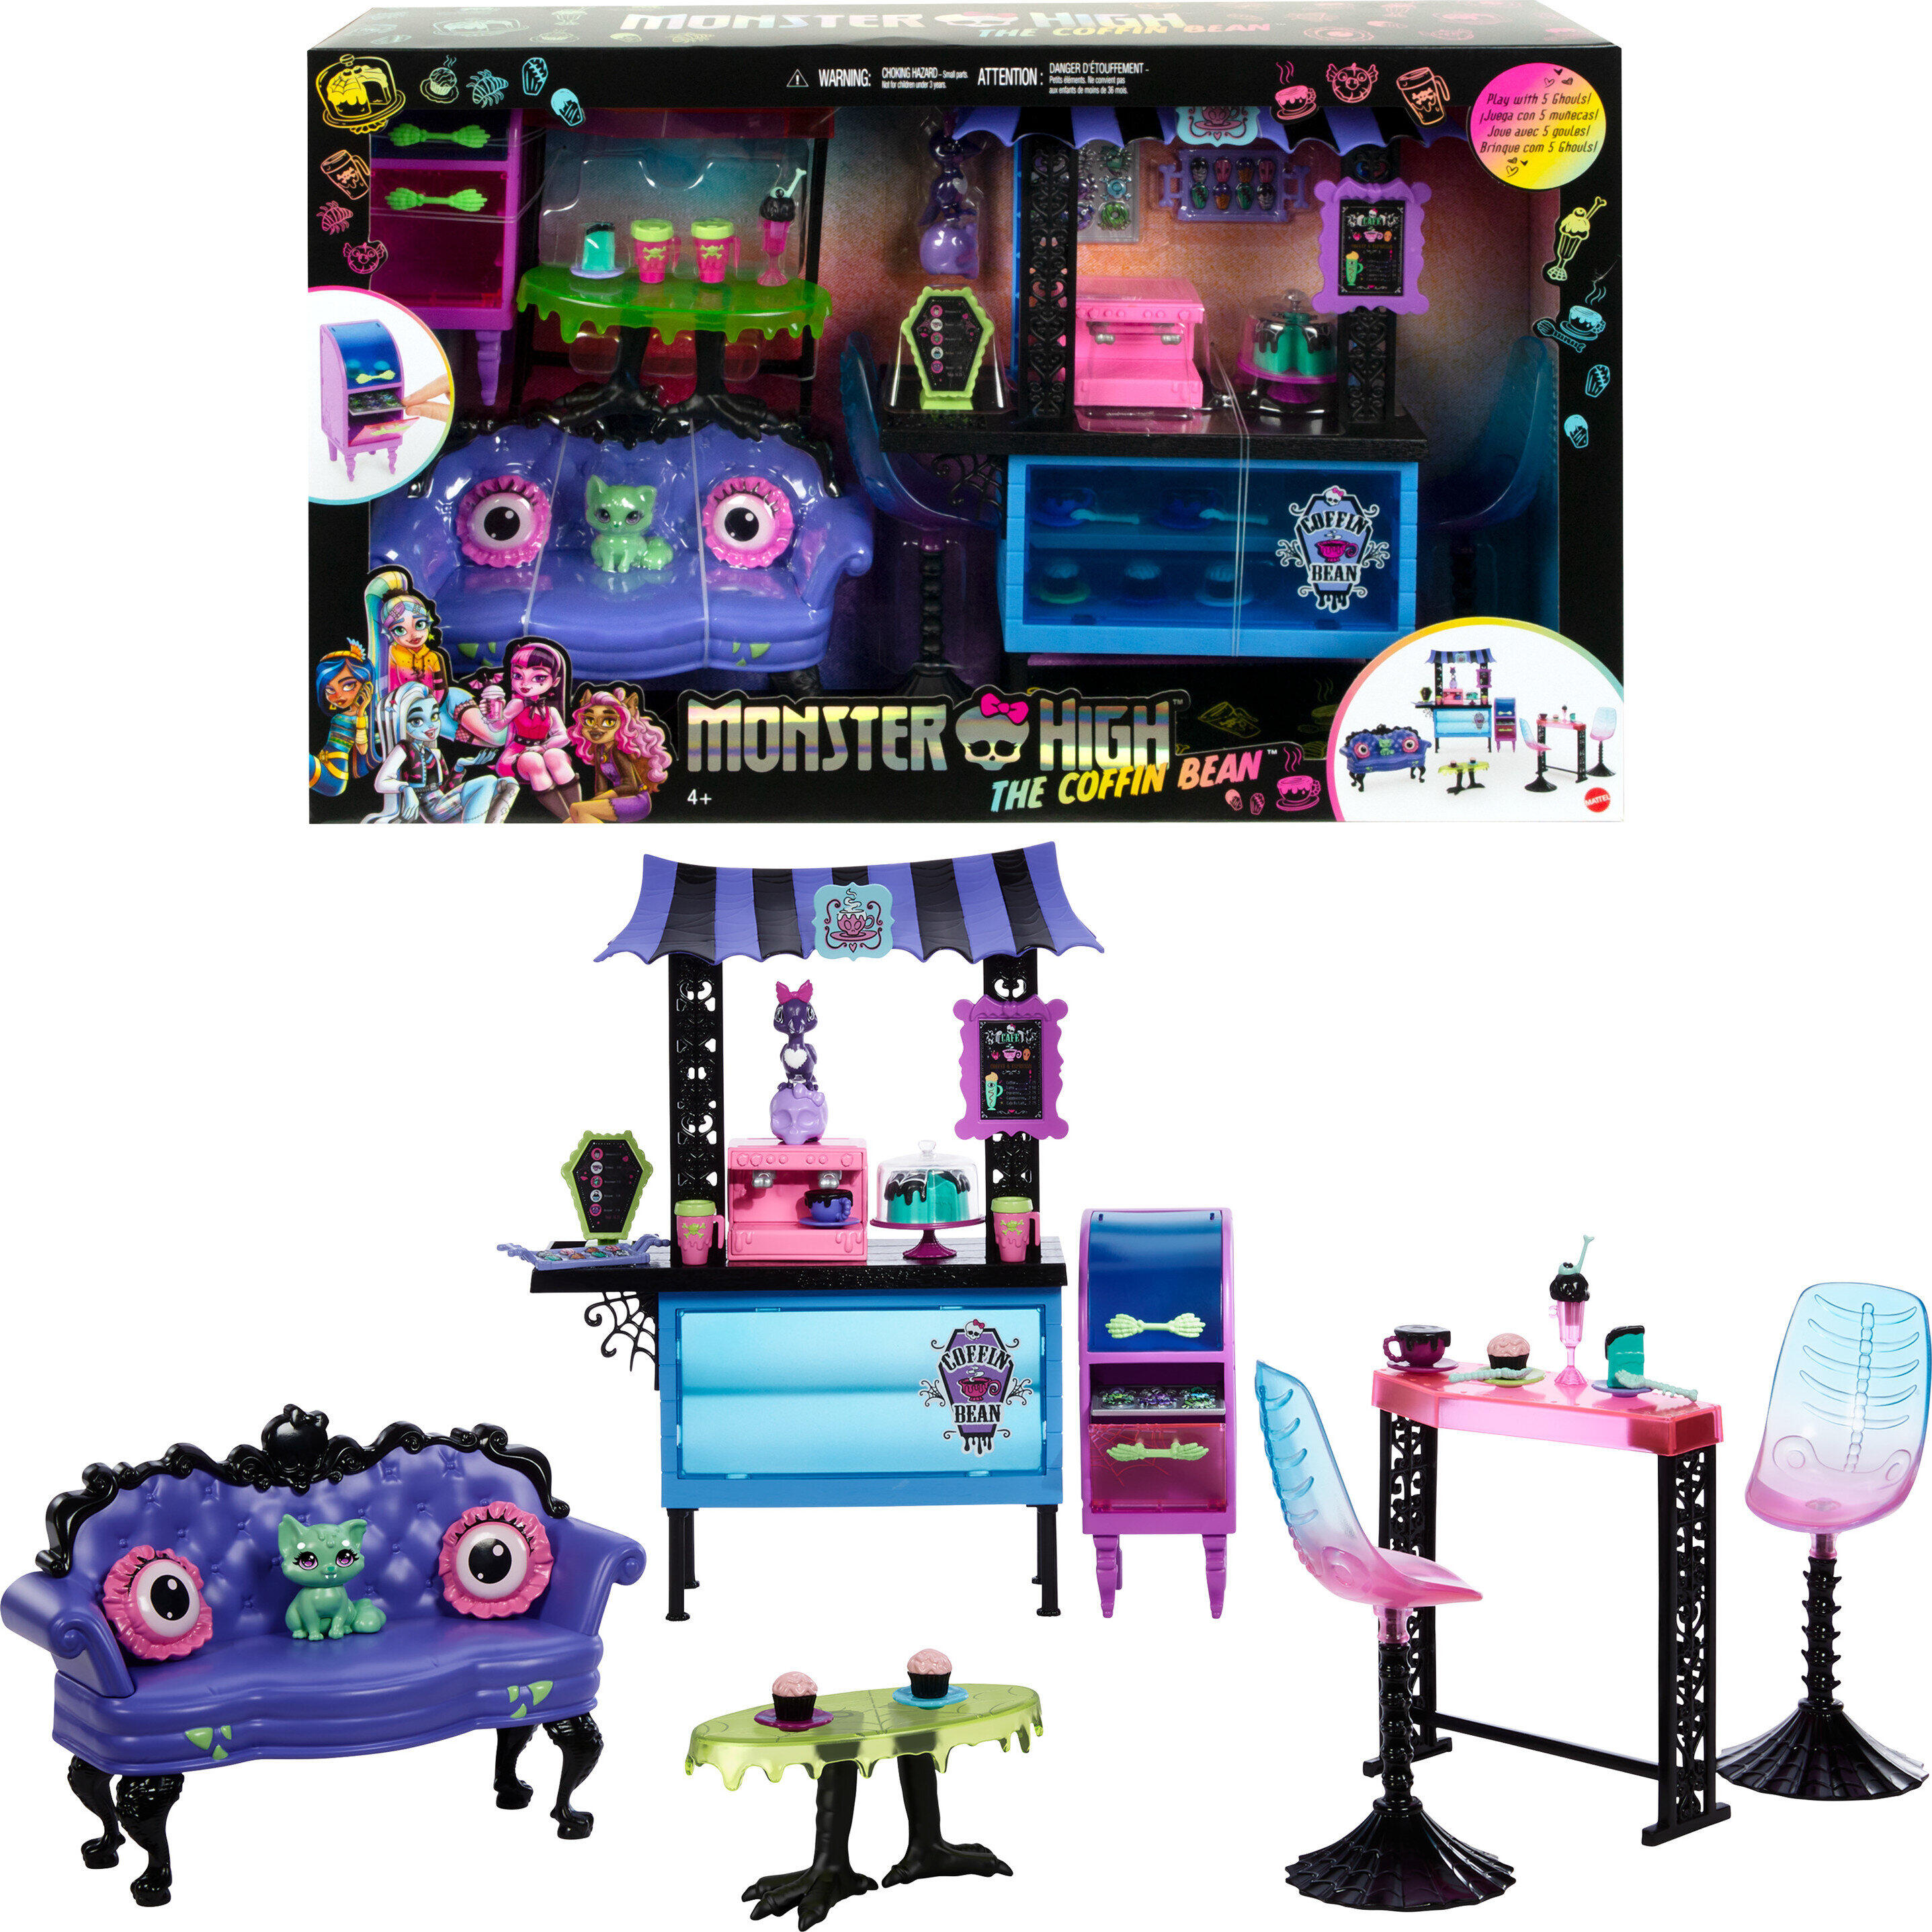 Monster High The Coffin Bean Playset with Cafe Furniture, Drink and Snack Accessories, Multicolor - image 1 of 7